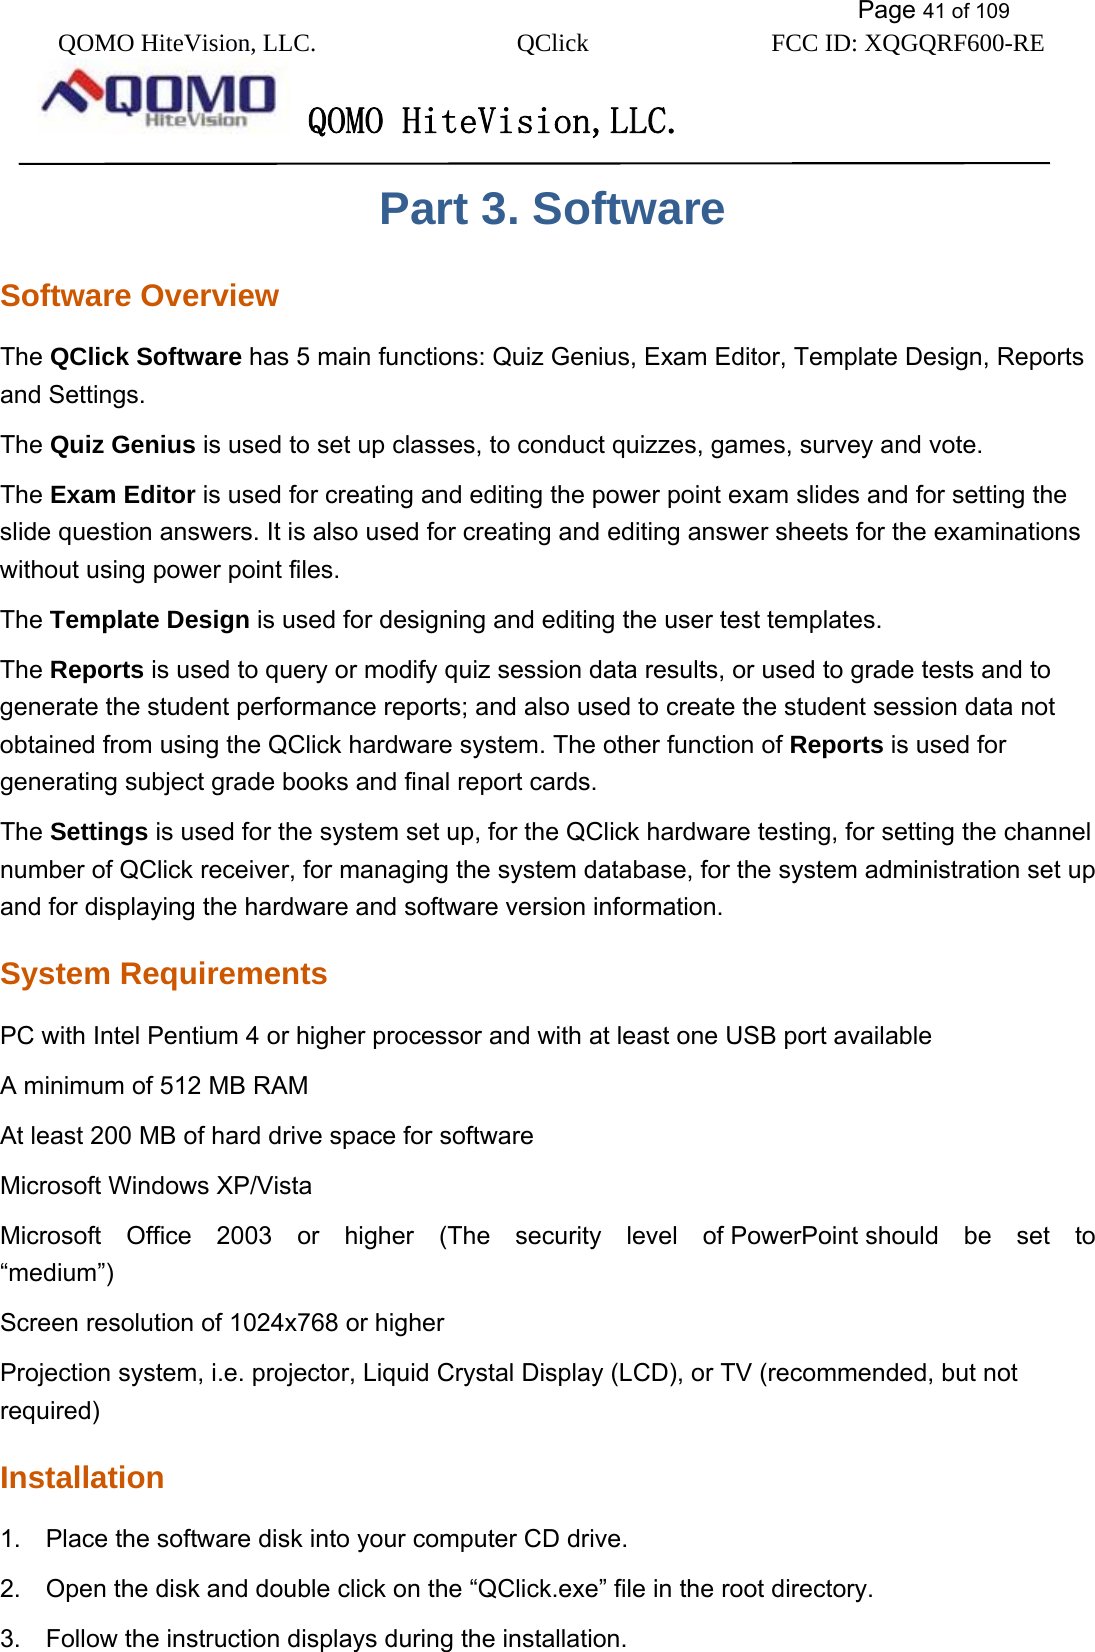           Page 41 of 109 QOMO HiteVision, LLC.  QClick        FCC ID: XQGQRF600-RE     QOMO HiteVision,LLC.   Part 3. Software Software Overview The QClick Software has 5 main functions: Quiz Genius, Exam Editor, Template Design, Reports and Settings. The Quiz Genius is used to set up classes, to conduct quizzes, games, survey and vote.   The Exam Editor is used for creating and editing the power point exam slides and for setting the slide question answers. It is also used for creating and editing answer sheets for the examinations without using power point files. The Template Design is used for designing and editing the user test templates. The Reports is used to query or modify quiz session data results, or used to grade tests and to generate the student performance reports; and also used to create the student session data not obtained from using the QClick hardware system. The other function of Reports is used for generating subject grade books and final report cards. The Settings is used for the system set up, for the QClick hardware testing, for setting the channel number of QClick receiver, for managing the system database, for the system administration set up and for displaying the hardware and software version information. System Requirements PC with Intel Pentium 4 or higher processor and with at least one USB port available A minimum of 512 MB RAM   At least 200 MB of hard drive space for software   Microsoft Windows XP/Vista   Microsoft  Office  2003  or  higher  (The  security  level  of PowerPoint should  be  set  to “medium”)  Screen resolution of 1024x768 or higher   Projection system, i.e. projector, Liquid Crystal Display (LCD), or TV (recommended, but not required) Installation 1.    Place the software disk into your computer CD drive. 2.    Open the disk and double click on the “QClick.exe” file in the root directory. 3.    Follow the instruction displays during the installation. 